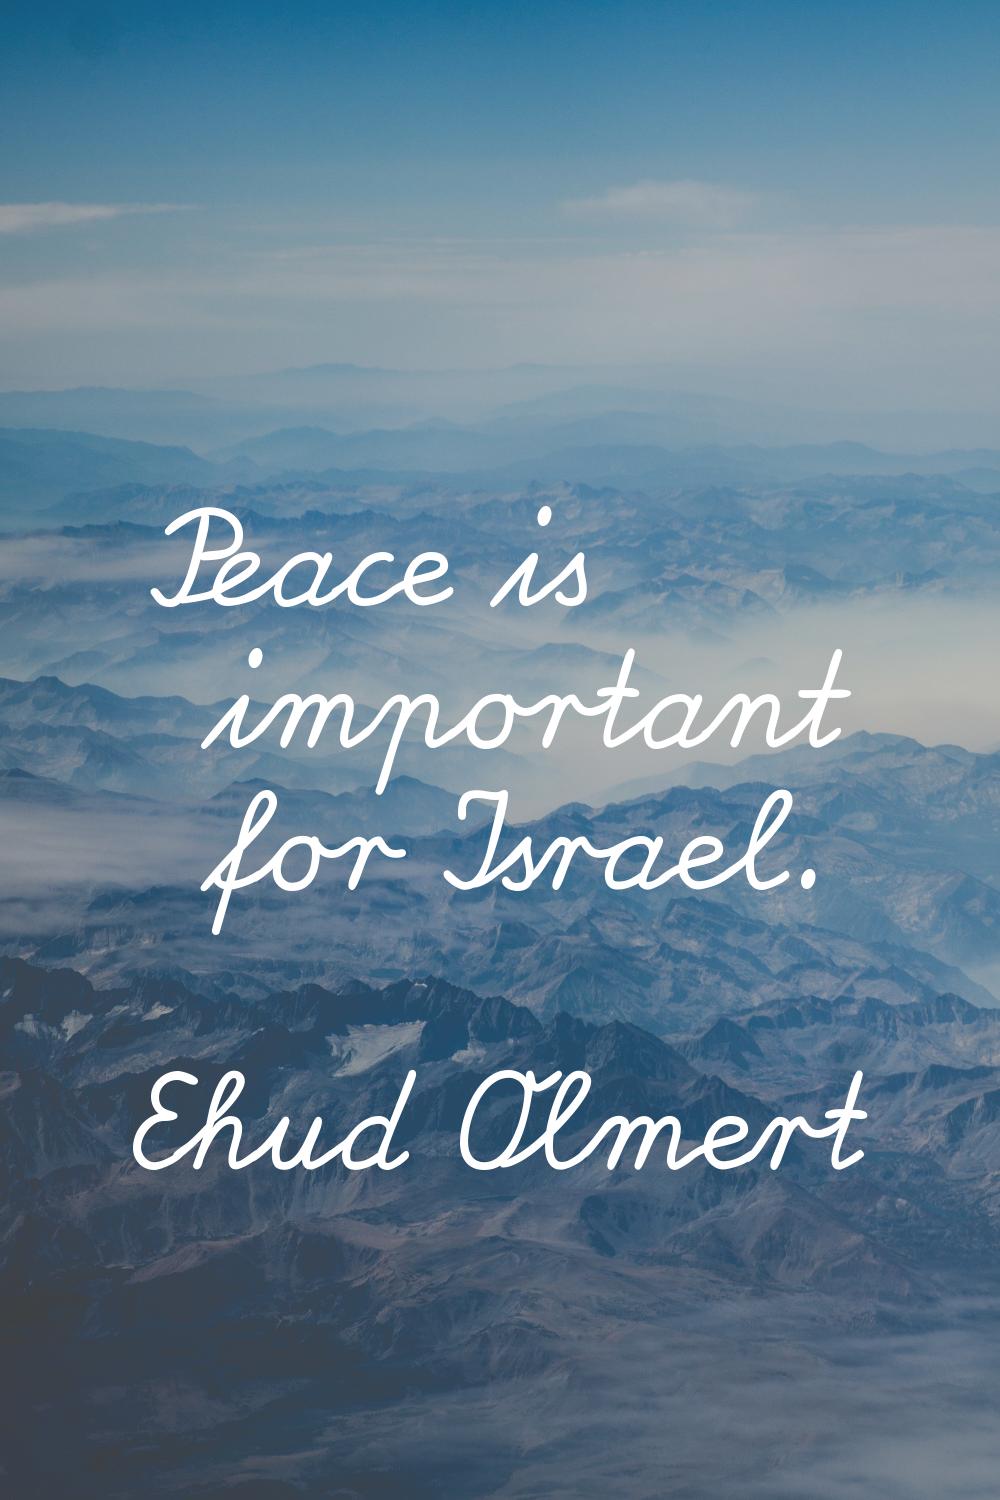 Peace is important for Israel.